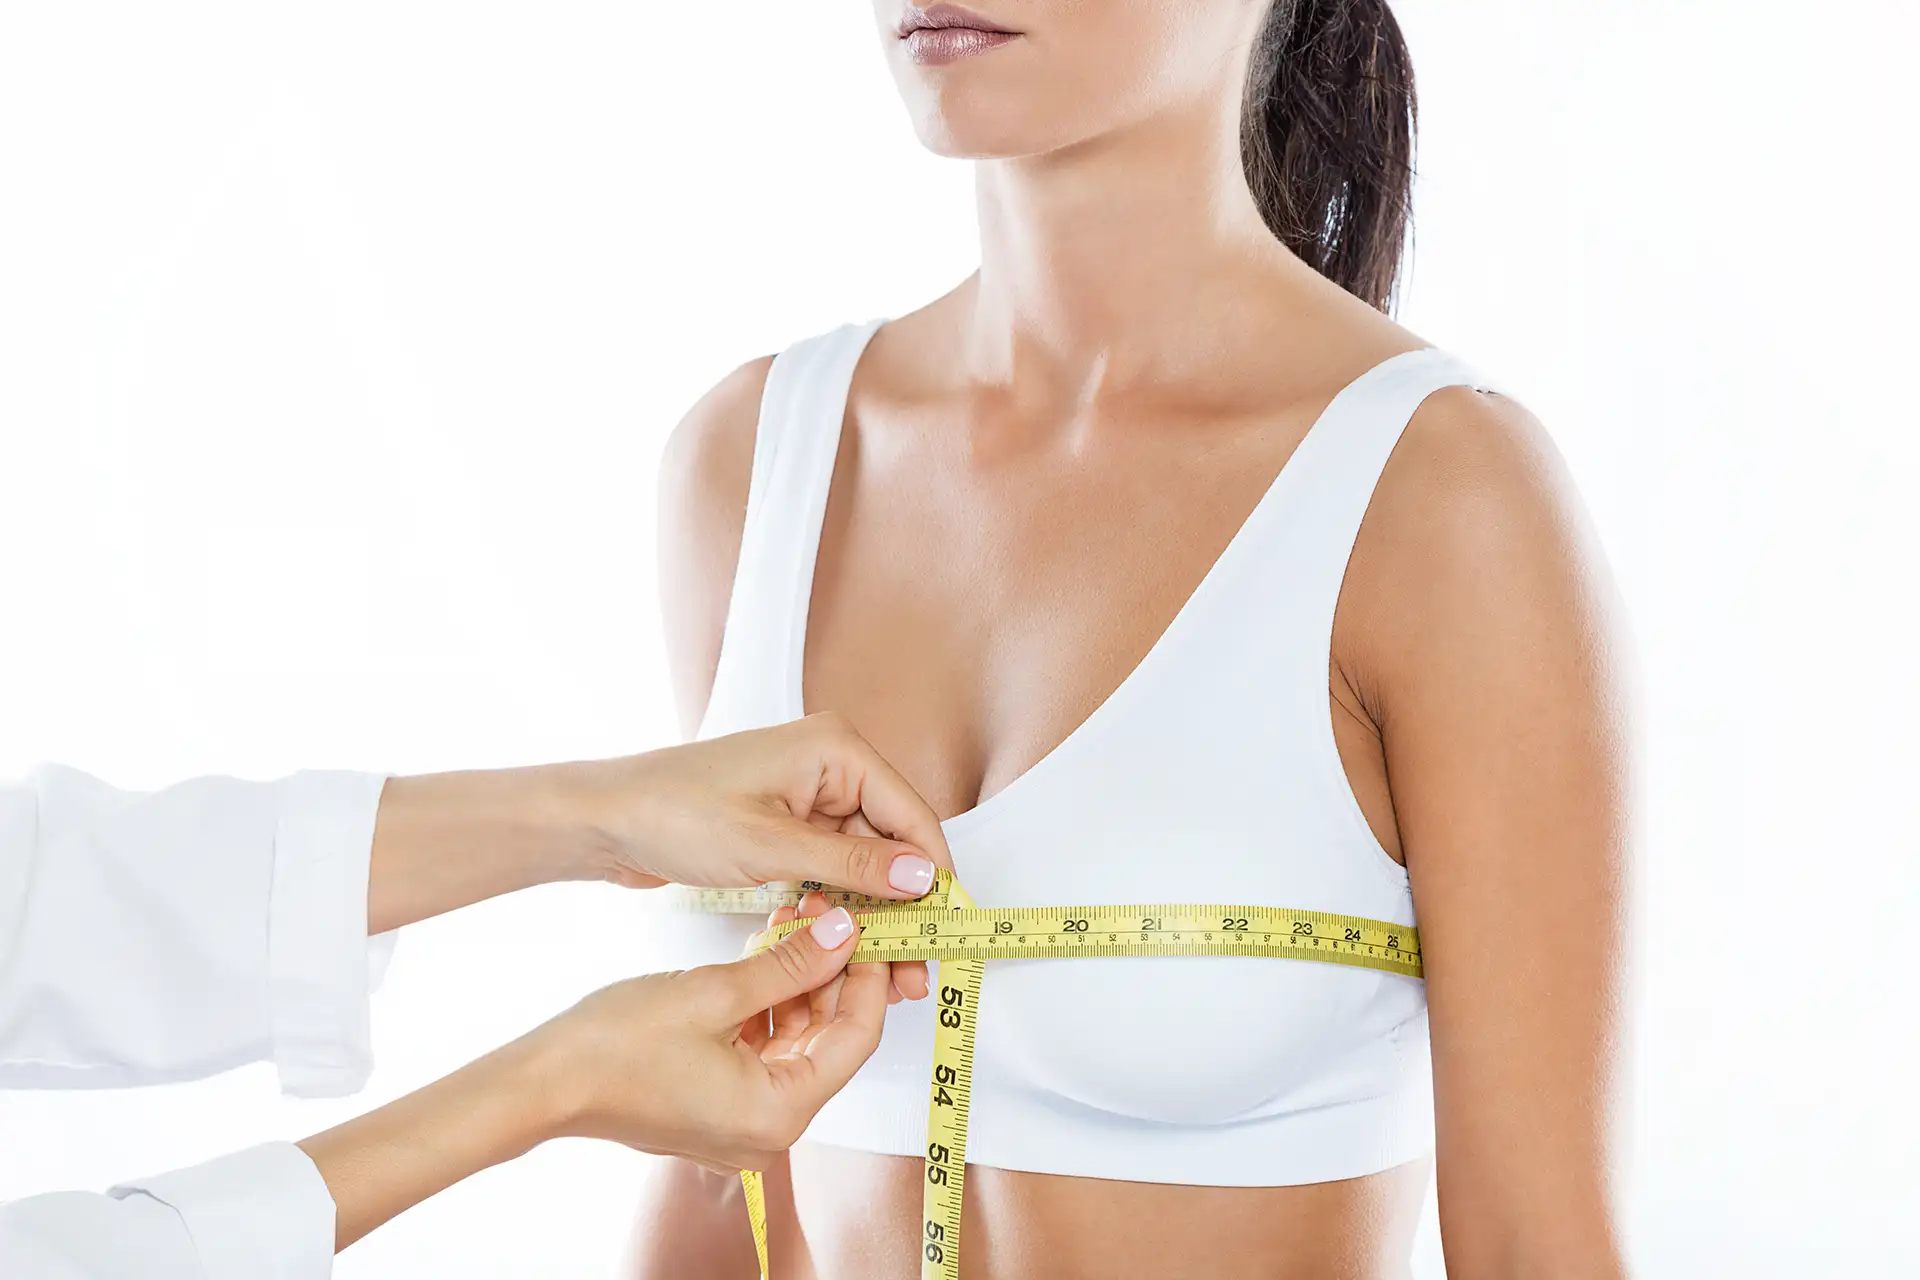 Breast Augmentation: Your Options and What You Need to Know